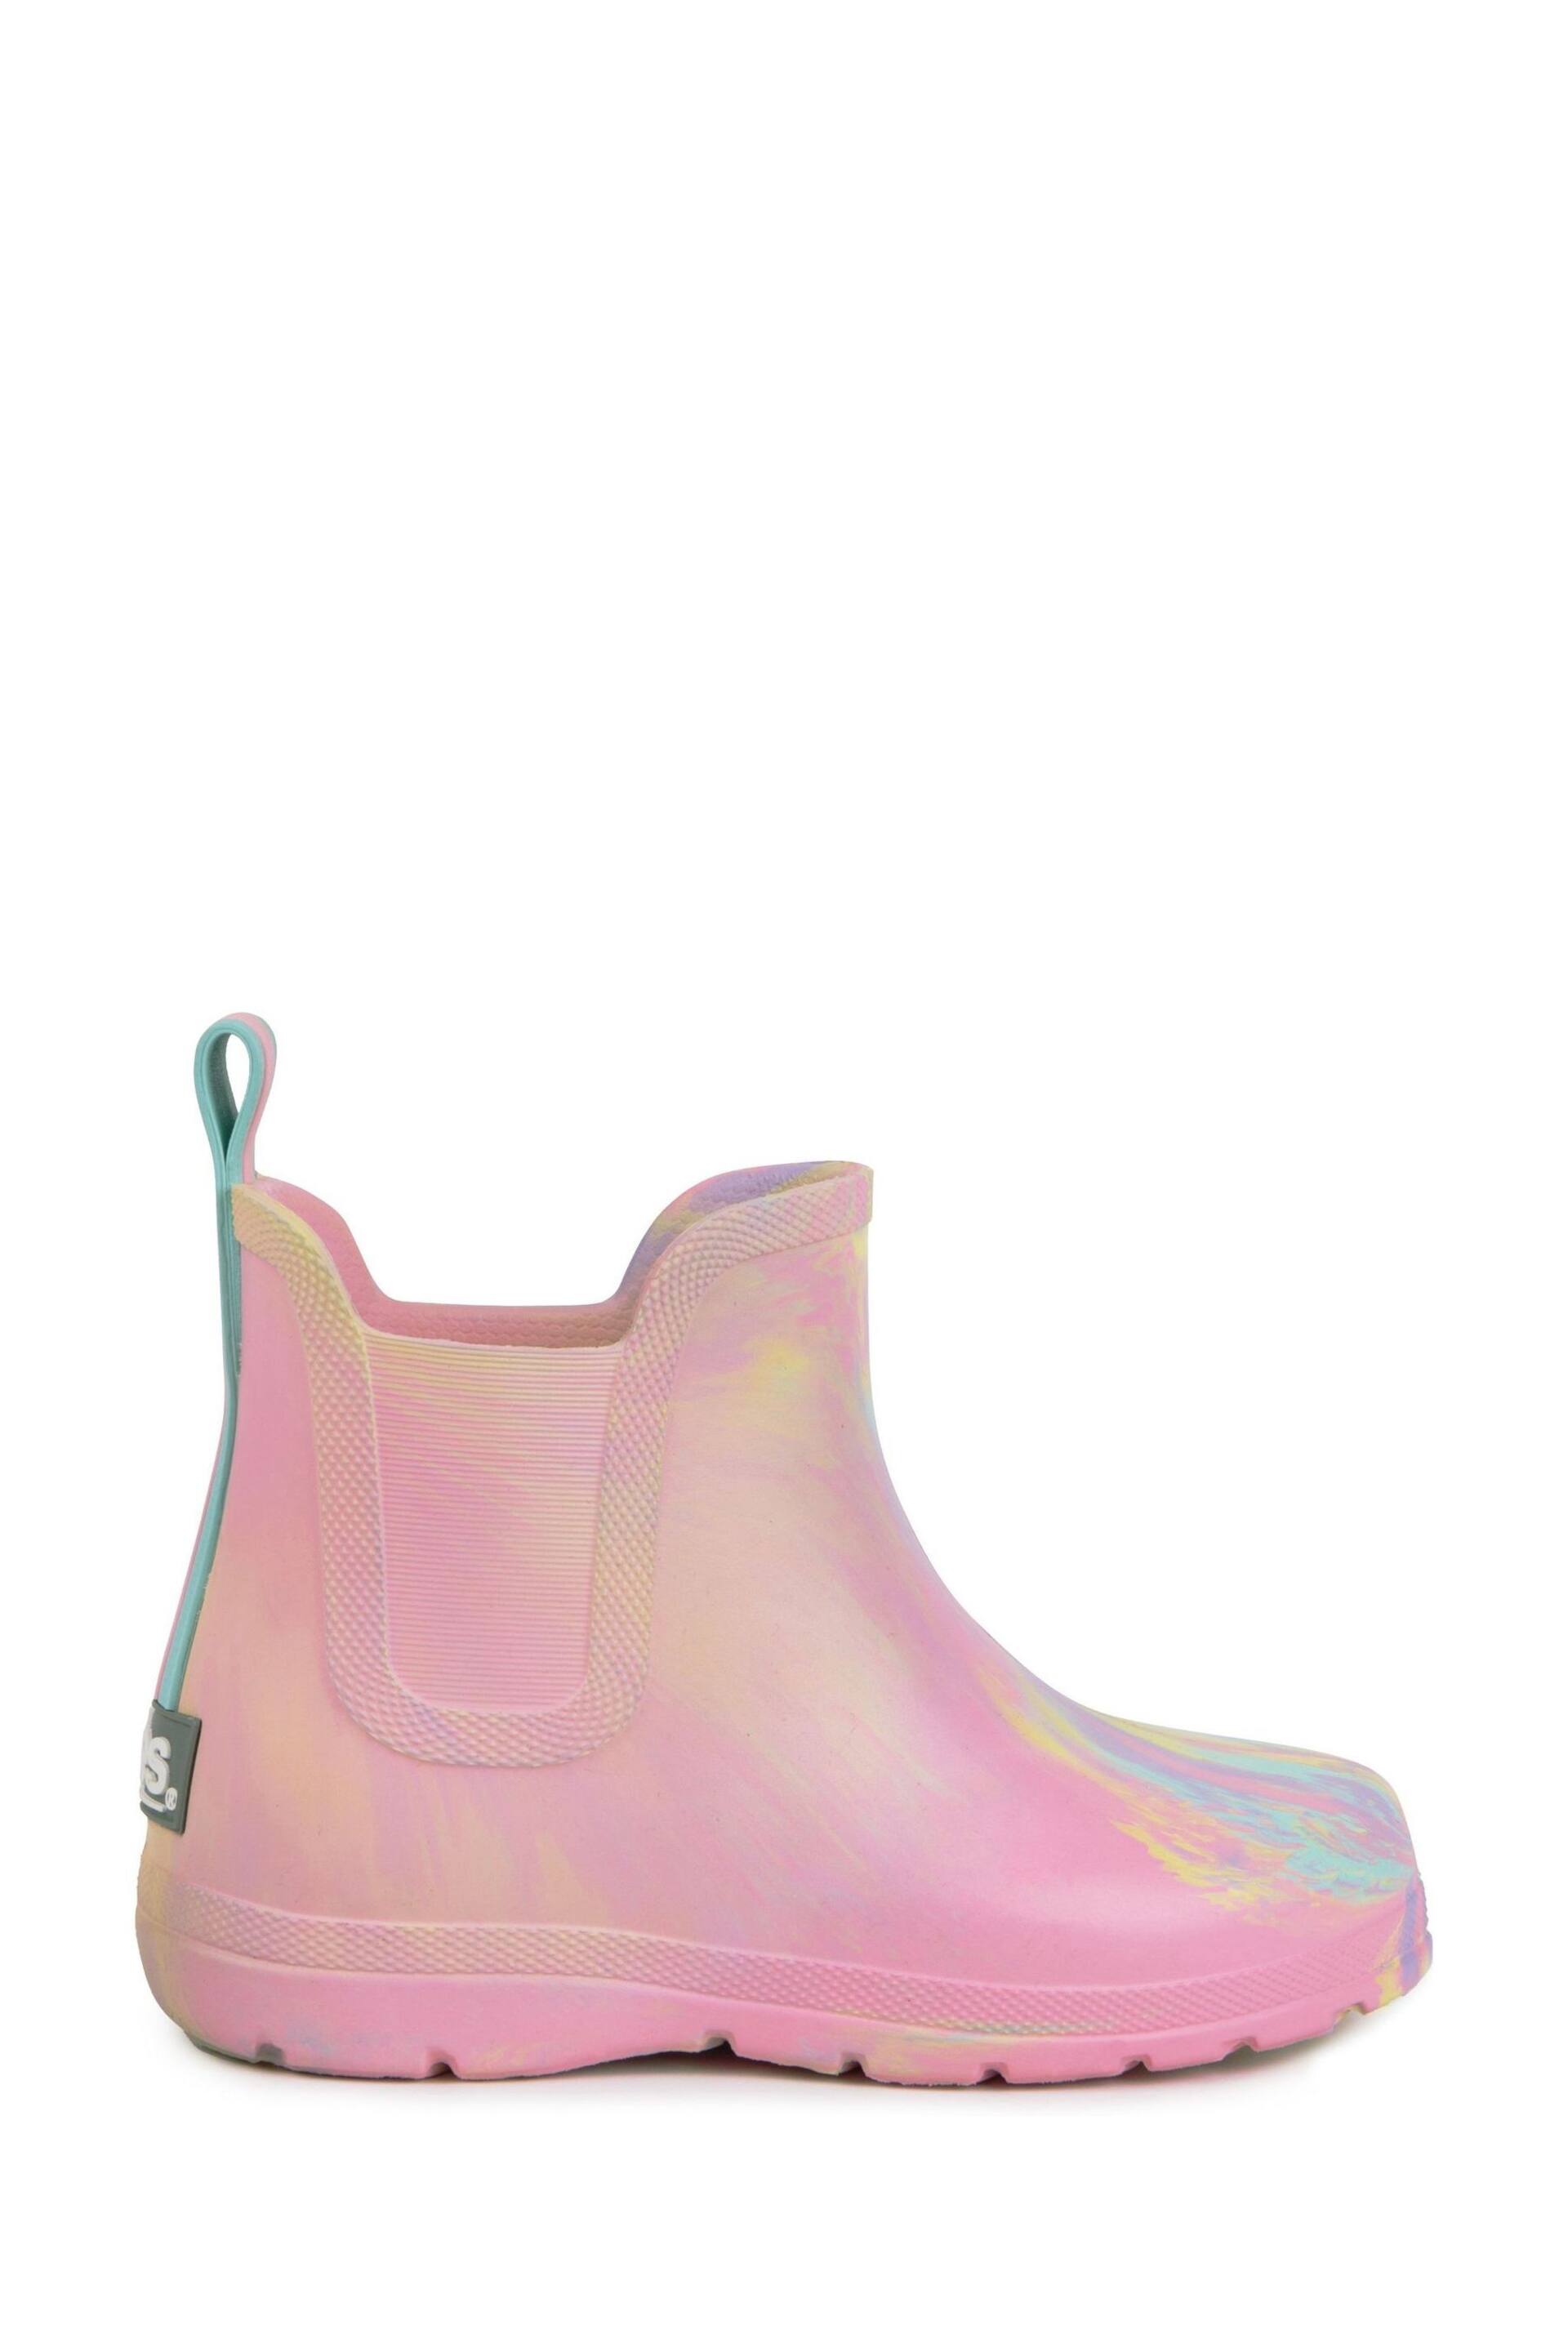 Totes Pink Childrens Chelsea Welly Boots - Image 2 of 5